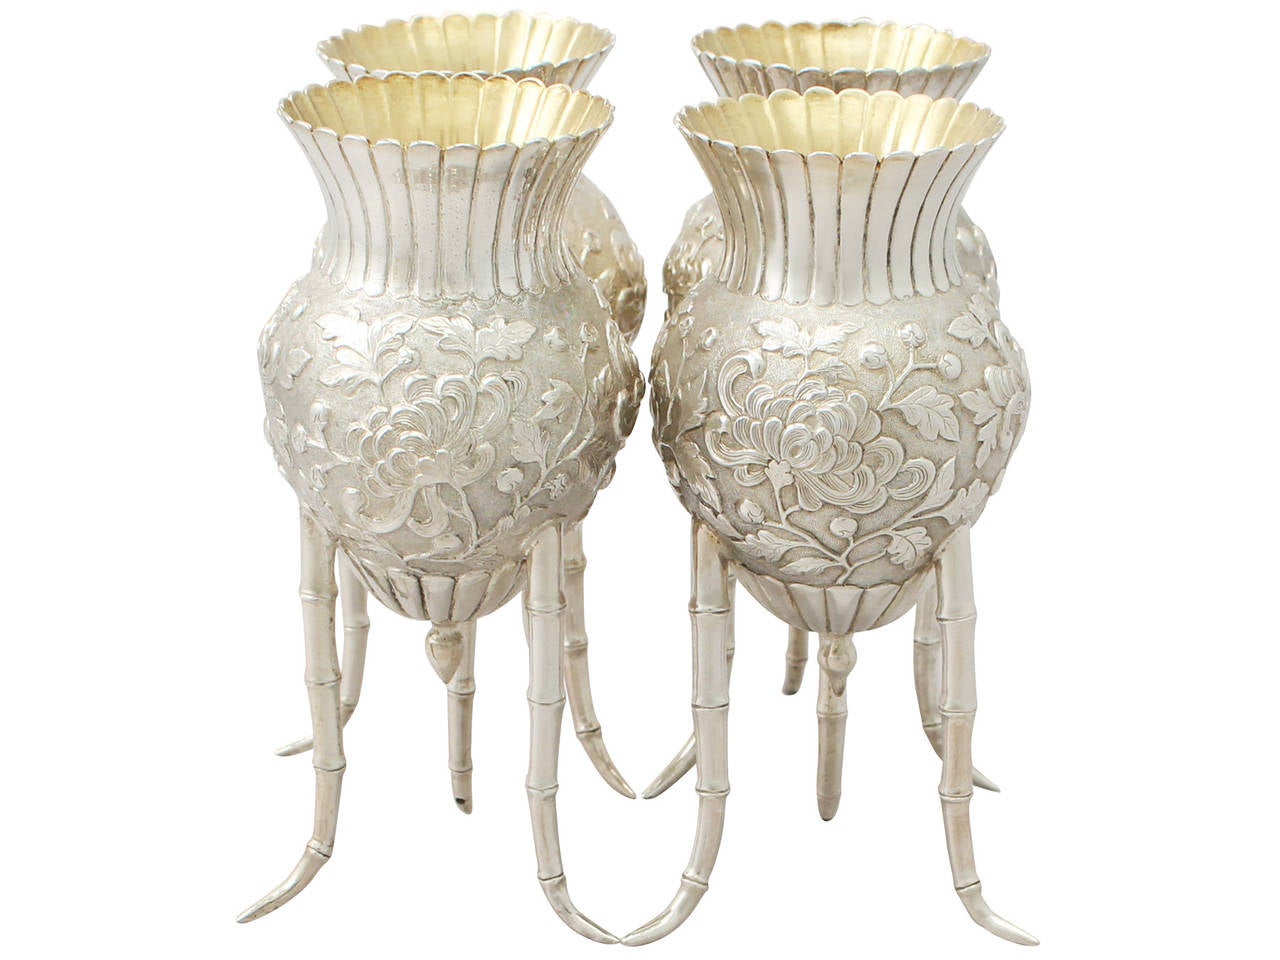 An exceptional, fine and impressive, unusual set of four antique Japanese silver vases; an addition to our antique Asian vase collection.

These exceptional Japanese antique silver vases have a gourd shaped form with a waisted fluted neck.

The body